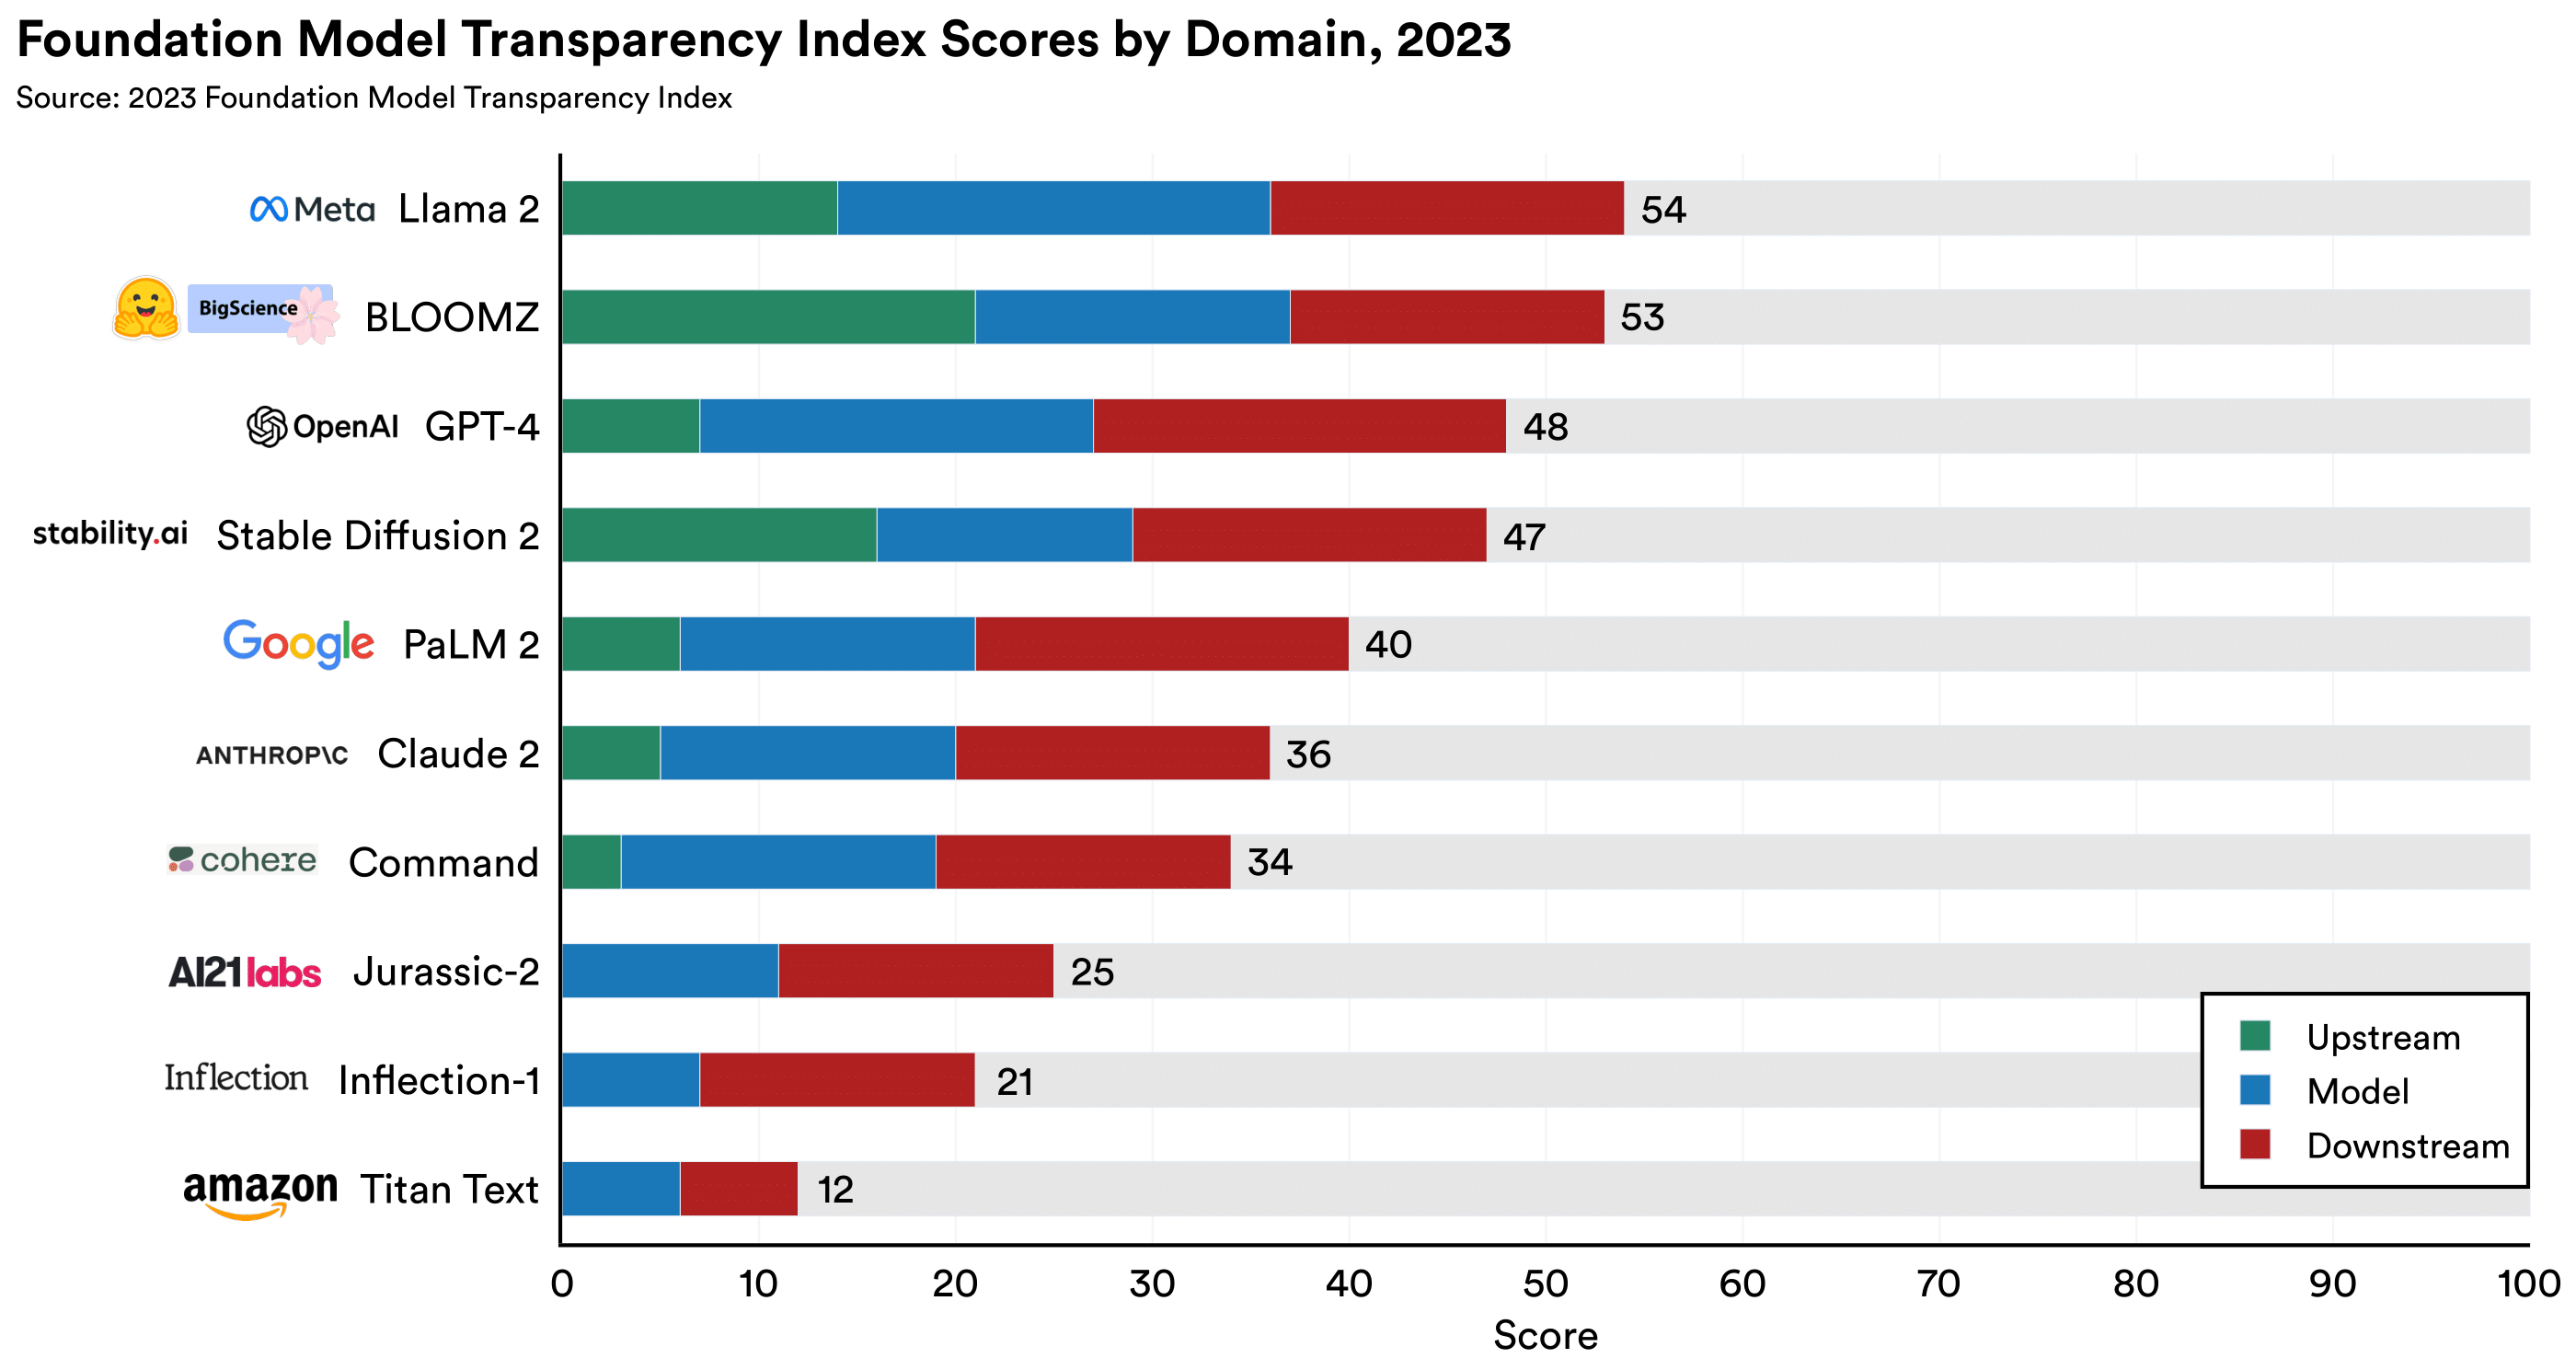 The Foundation Model Transparency Index